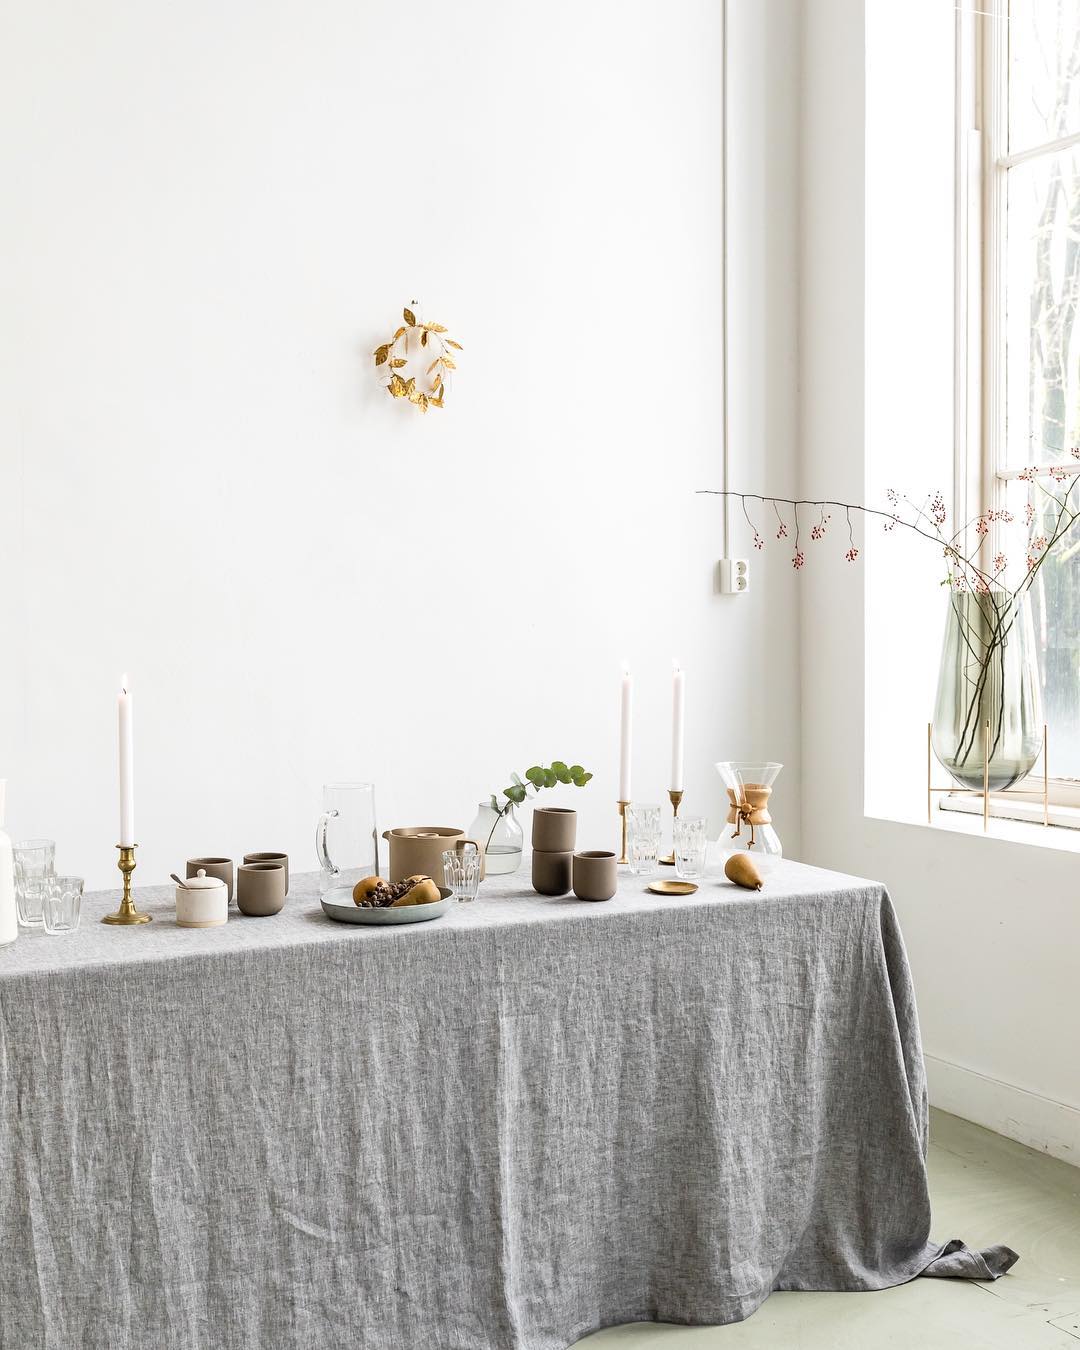 Gray and brownish table setting with candle holders and a chemex carafe